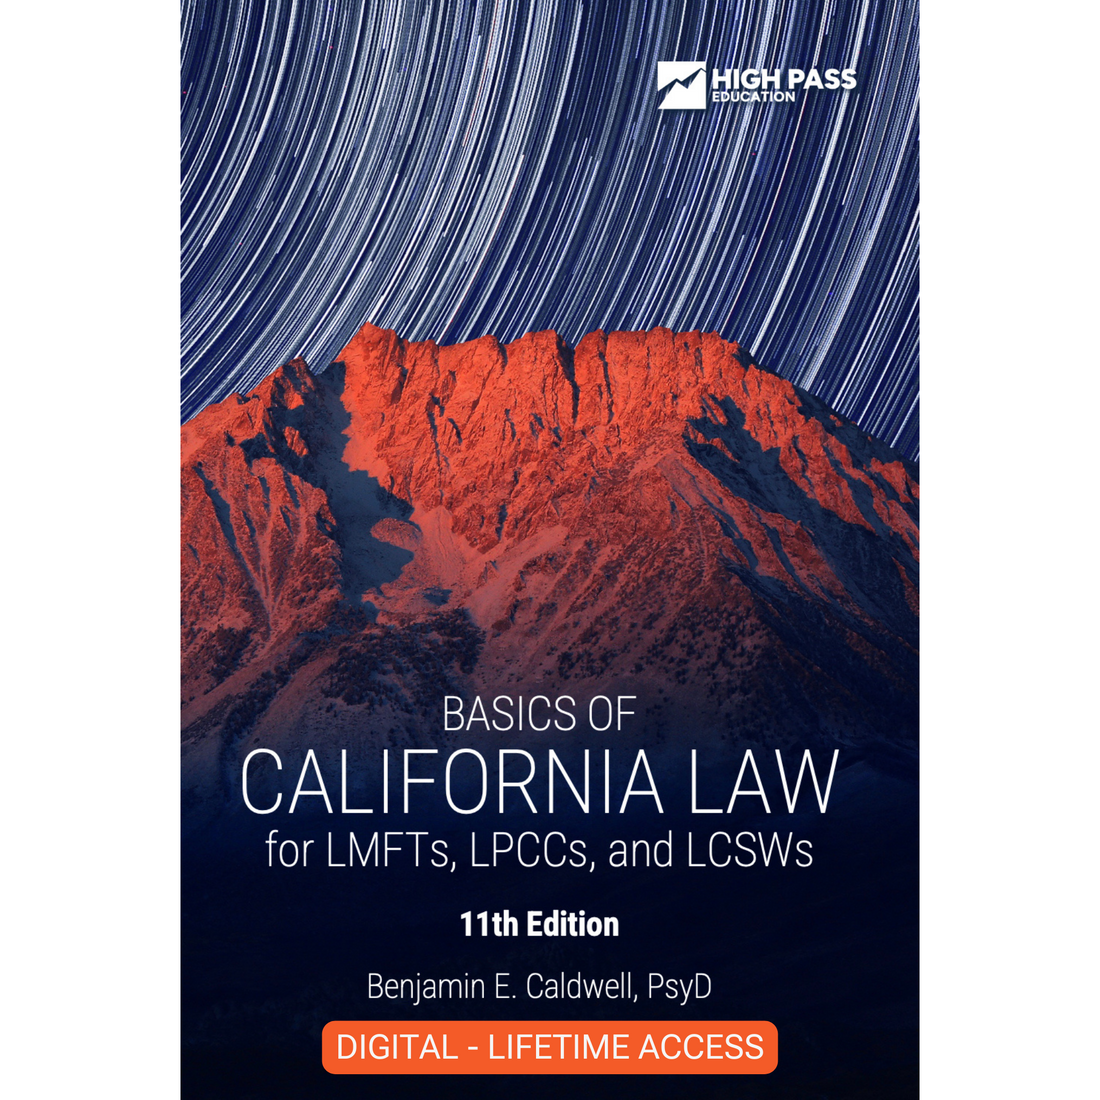 Lifetime access - Basics of California Law for LMFTs, LPCCs, and LCSWs, 11th ed digital